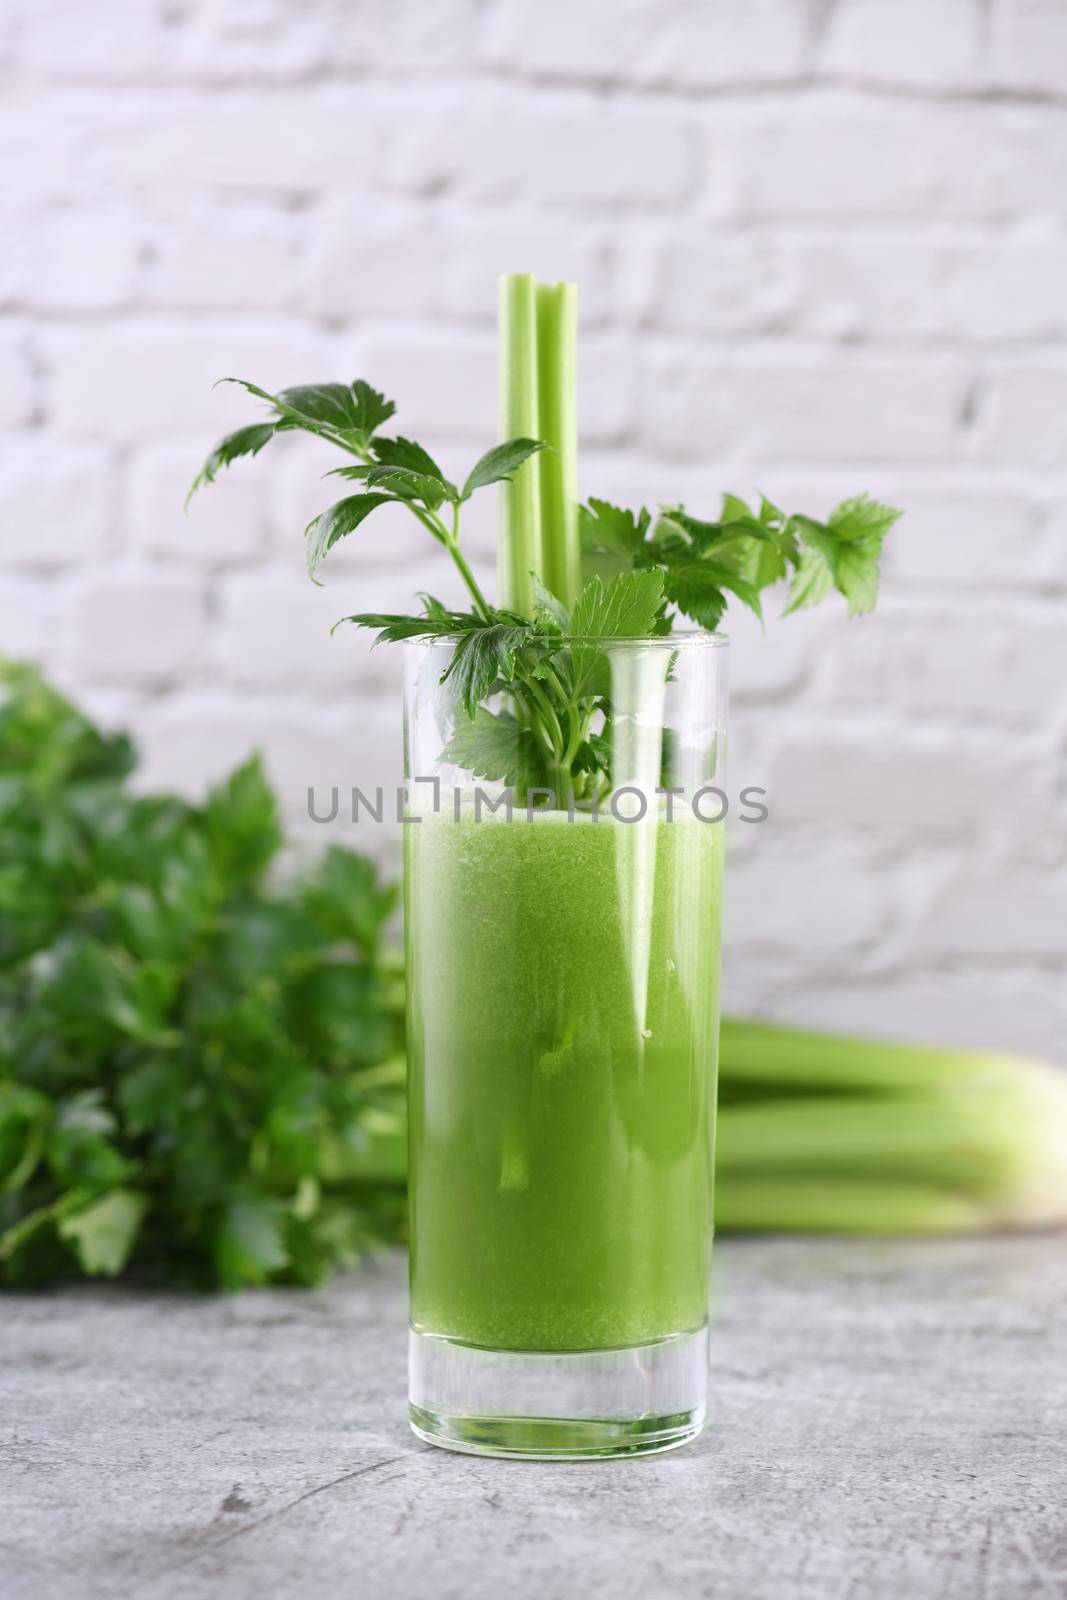  Glass of freshly made celery smoothie.   by Apolonia